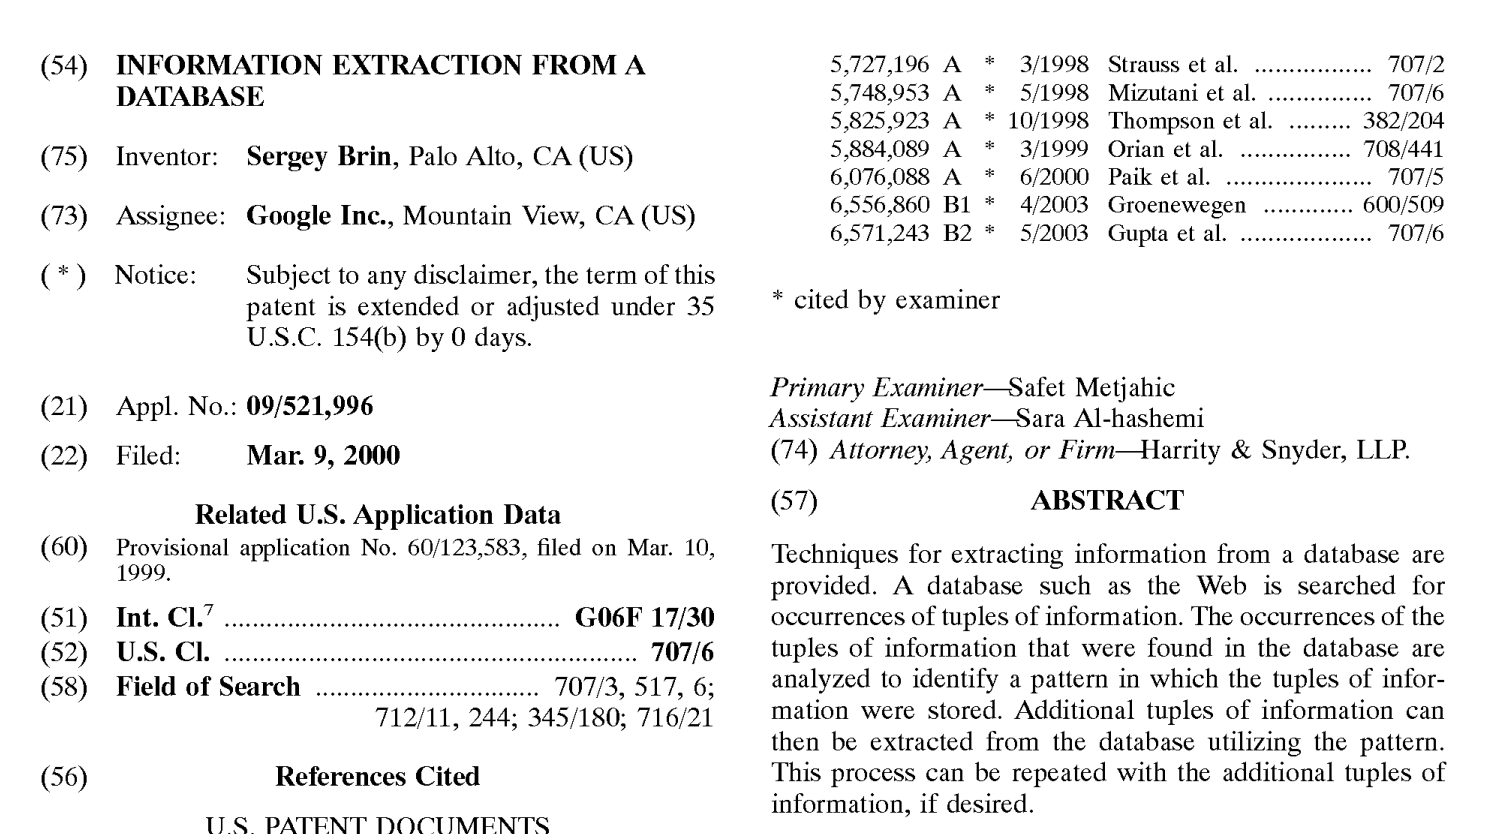 Sergey Brin's Patent Application that Information Extraction From a Database